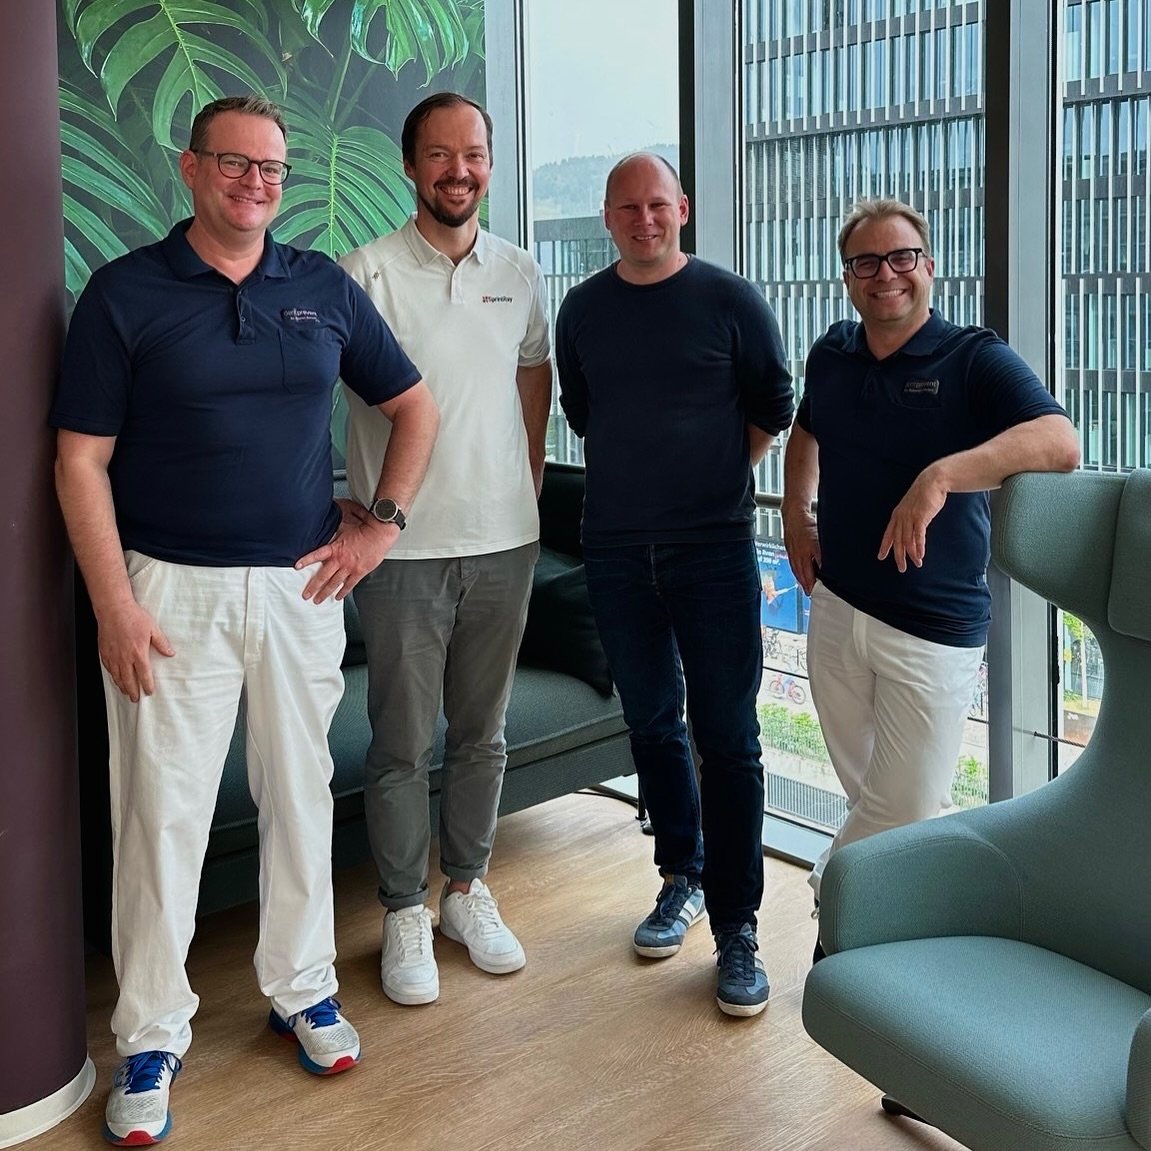 Working together for the future of dentistry! Holger Emmert from @sprintray.emea visited our digital practice today. 👀🚀
#sprintray #digitaldentistry #3dprinting #dentistryworld